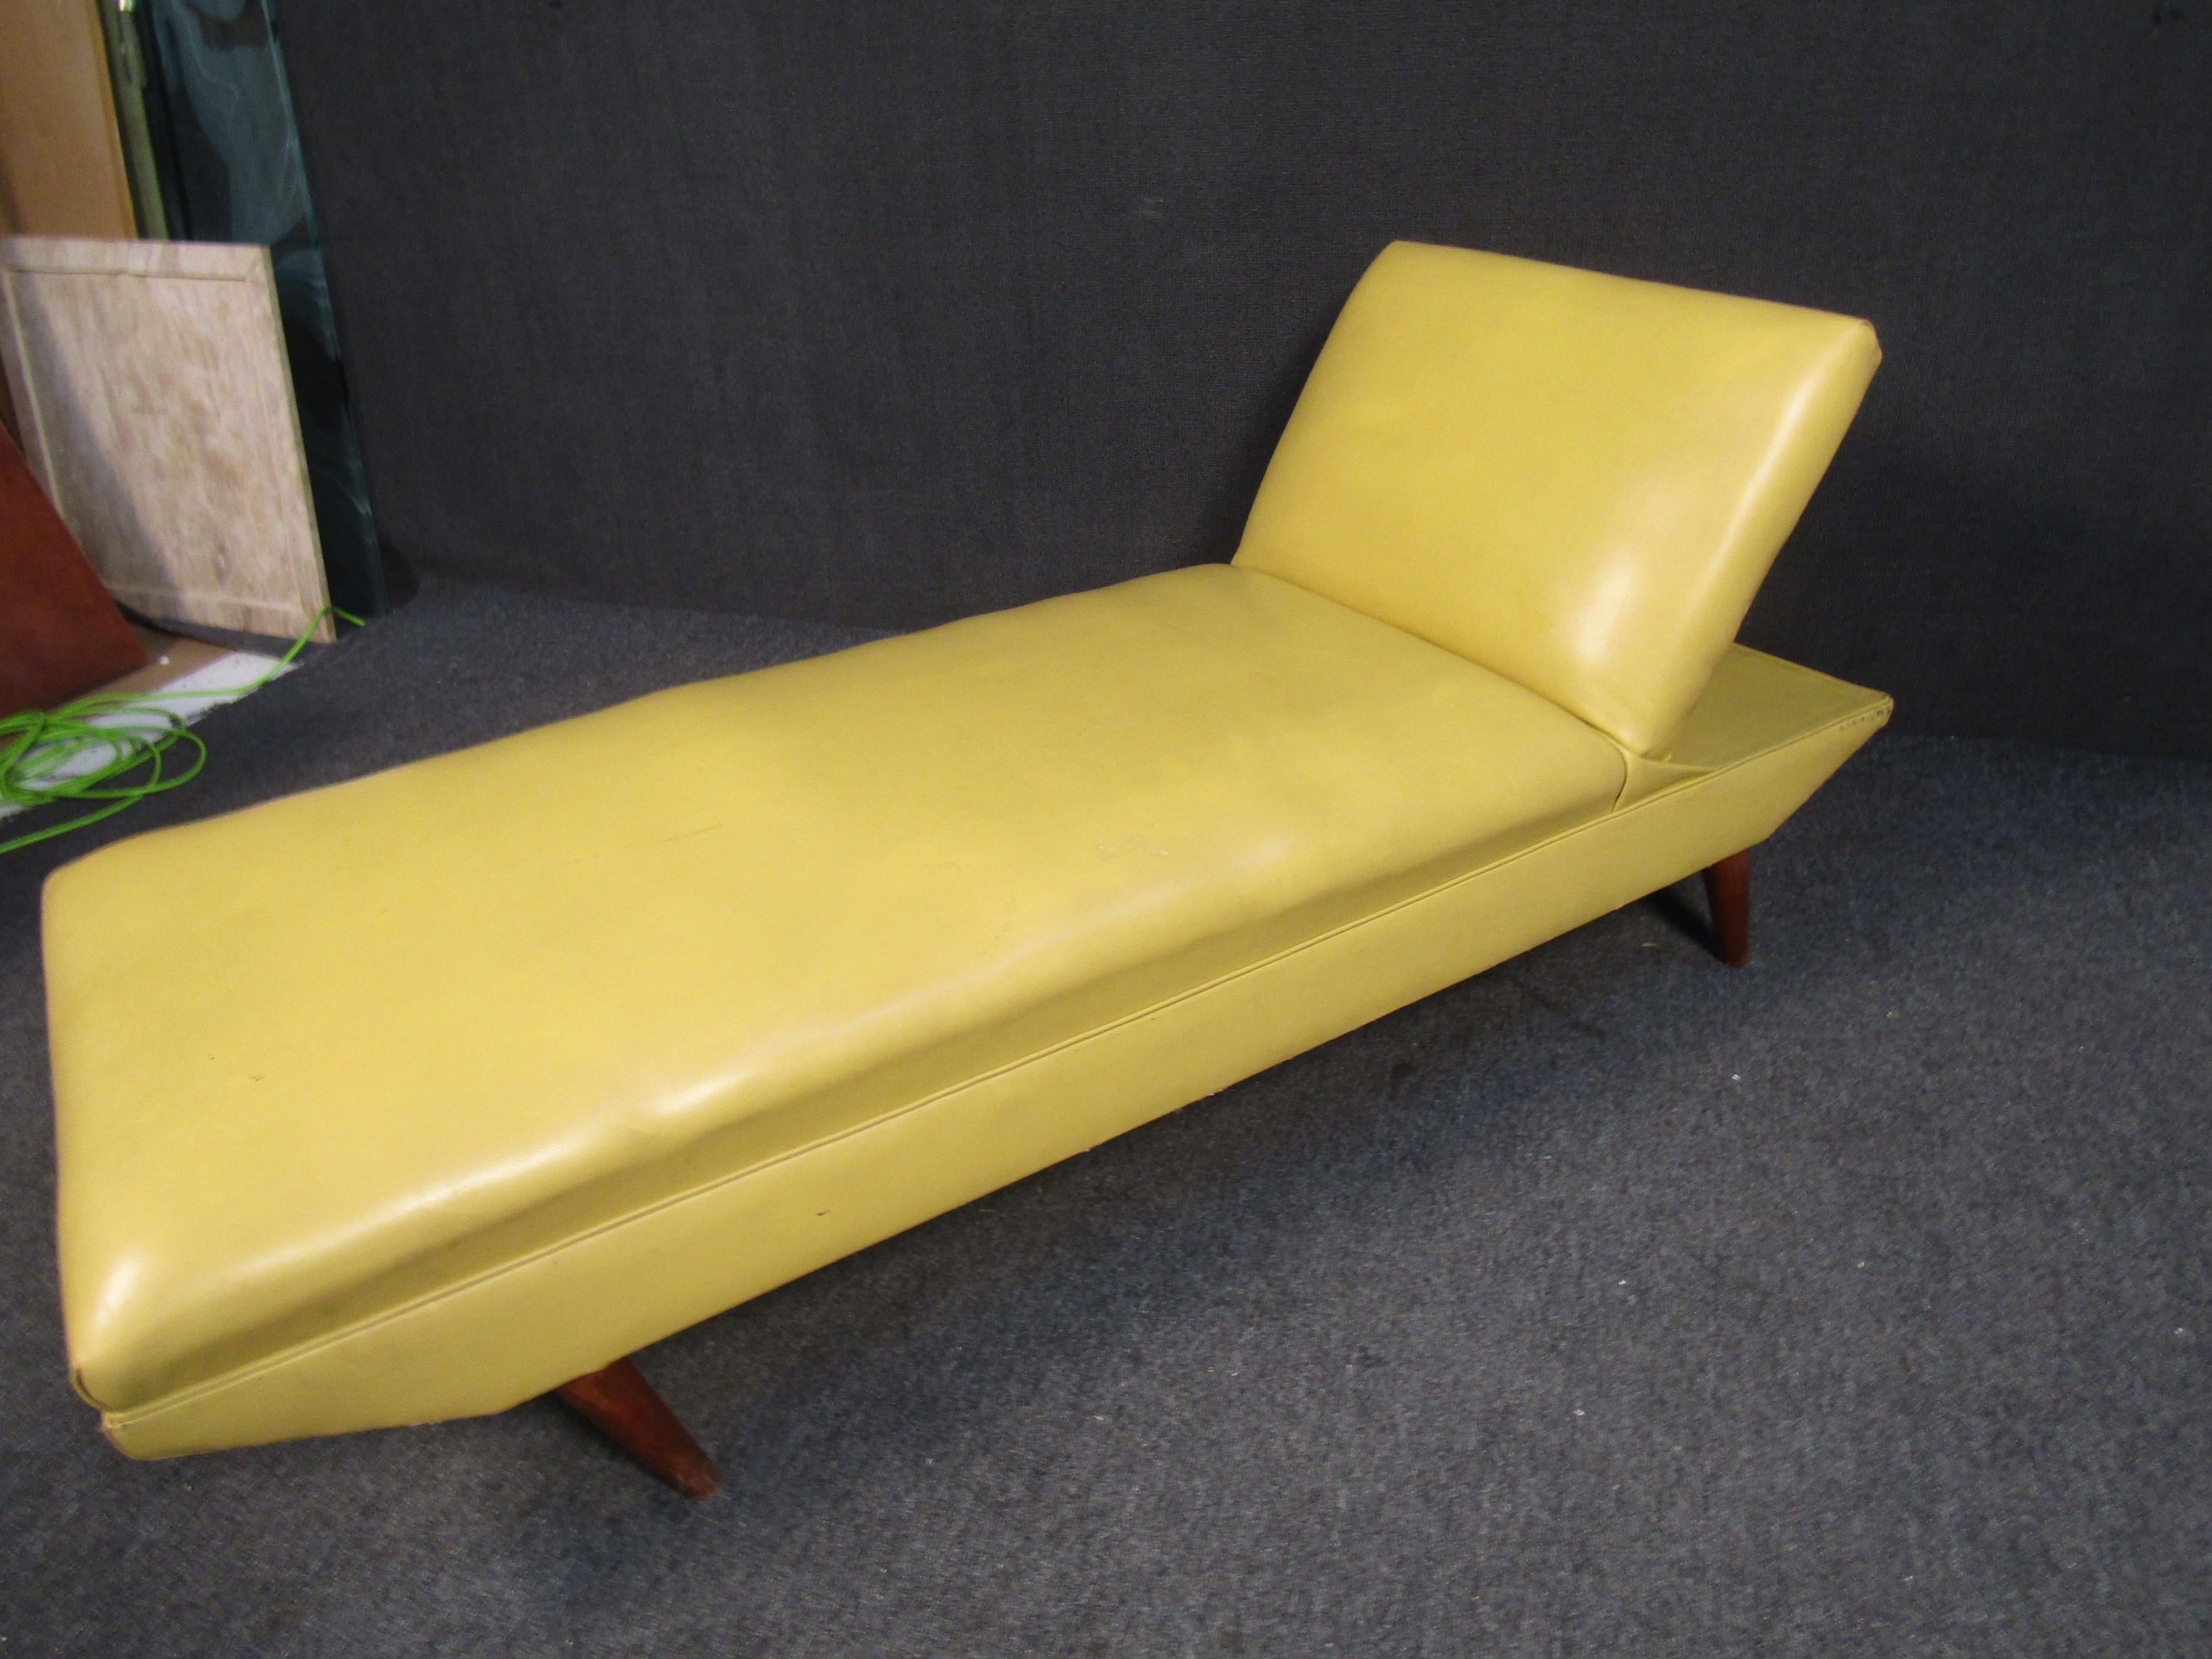 Pairing a vibrant upholstery with walnut legs and frame, this Mid-Century Modern chaise lounge could be used as a massage table or as a comfortable yet stylish place to recline. Please confirm item location with seller (NY/NJ).